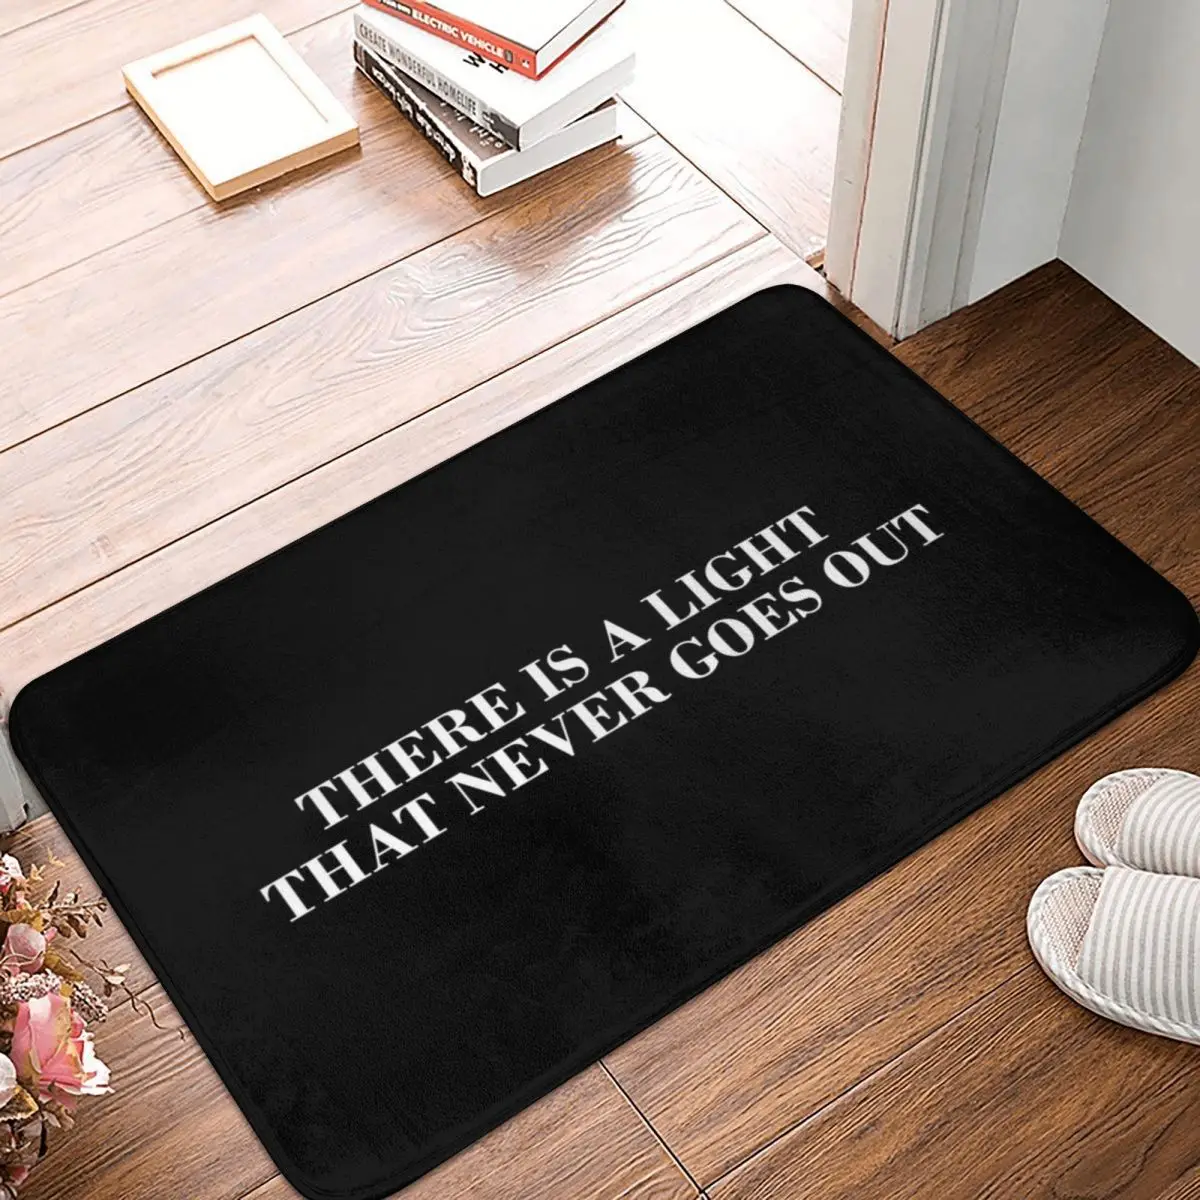 

There Is A Light That Never Goes Out Doormat Carpet Mat Rug Polyester PVC Non-Slip Floor Decor Bath Bathroom Kitchen Balcony